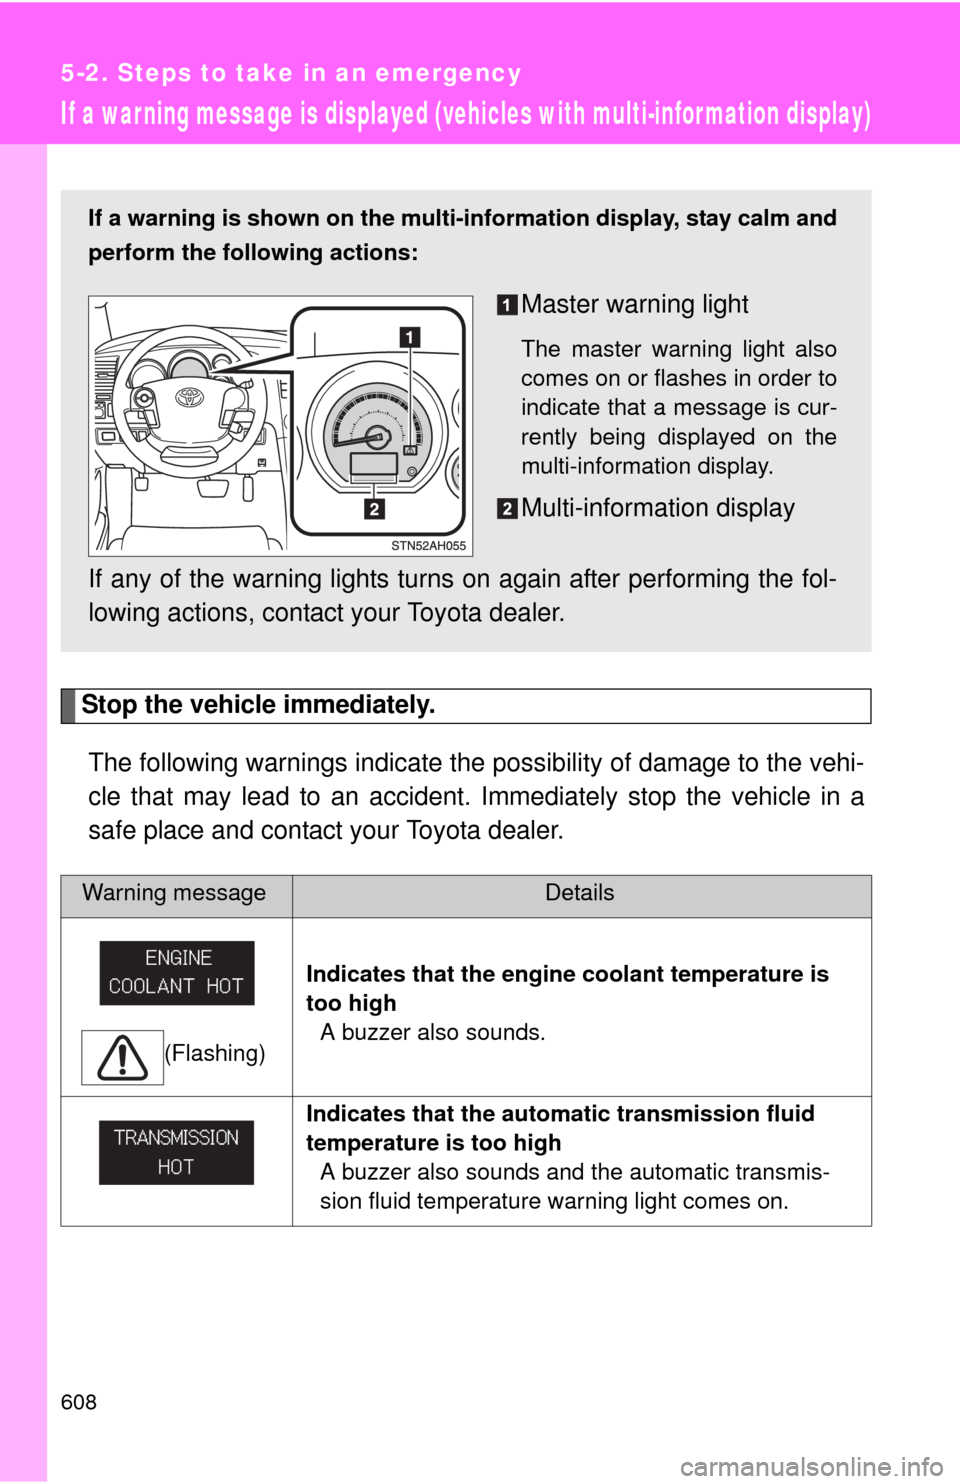 TOYOTA TUNDRA 2011 2.G Owners Manual 608
5-2. Steps to take in an emergency
If a war ning message is displayed (vehicles with multi-infor mation display)
Stop the vehicle immediately.The following warnings indicate the possibility of dam